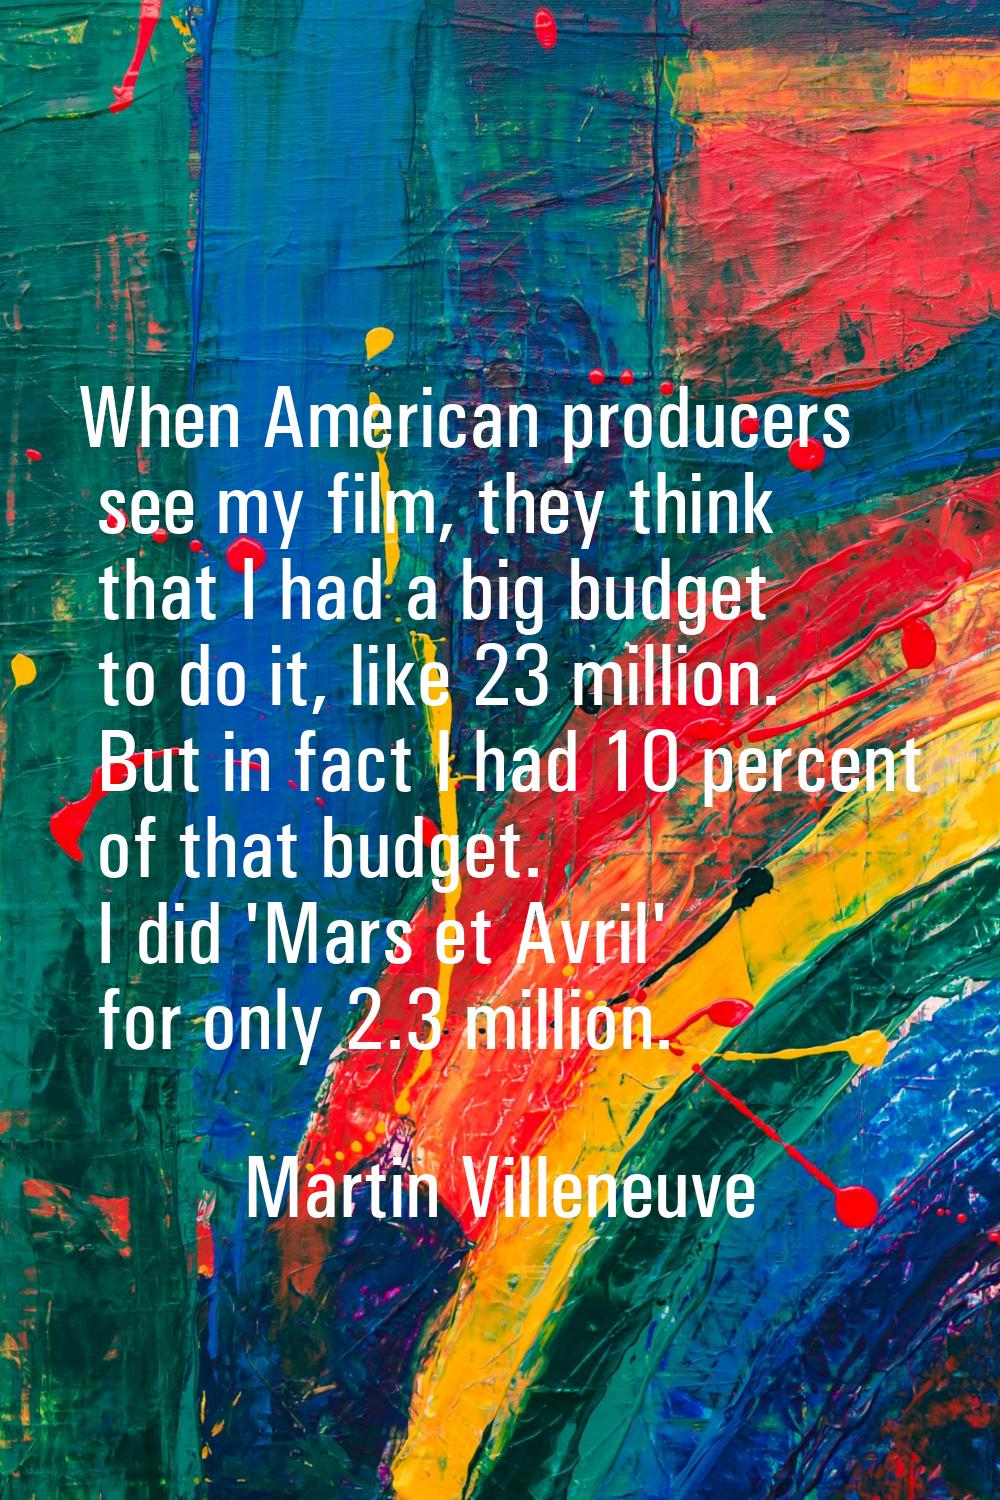 When American producers see my film, they think that I had a big budget to do it, like 23 million. 